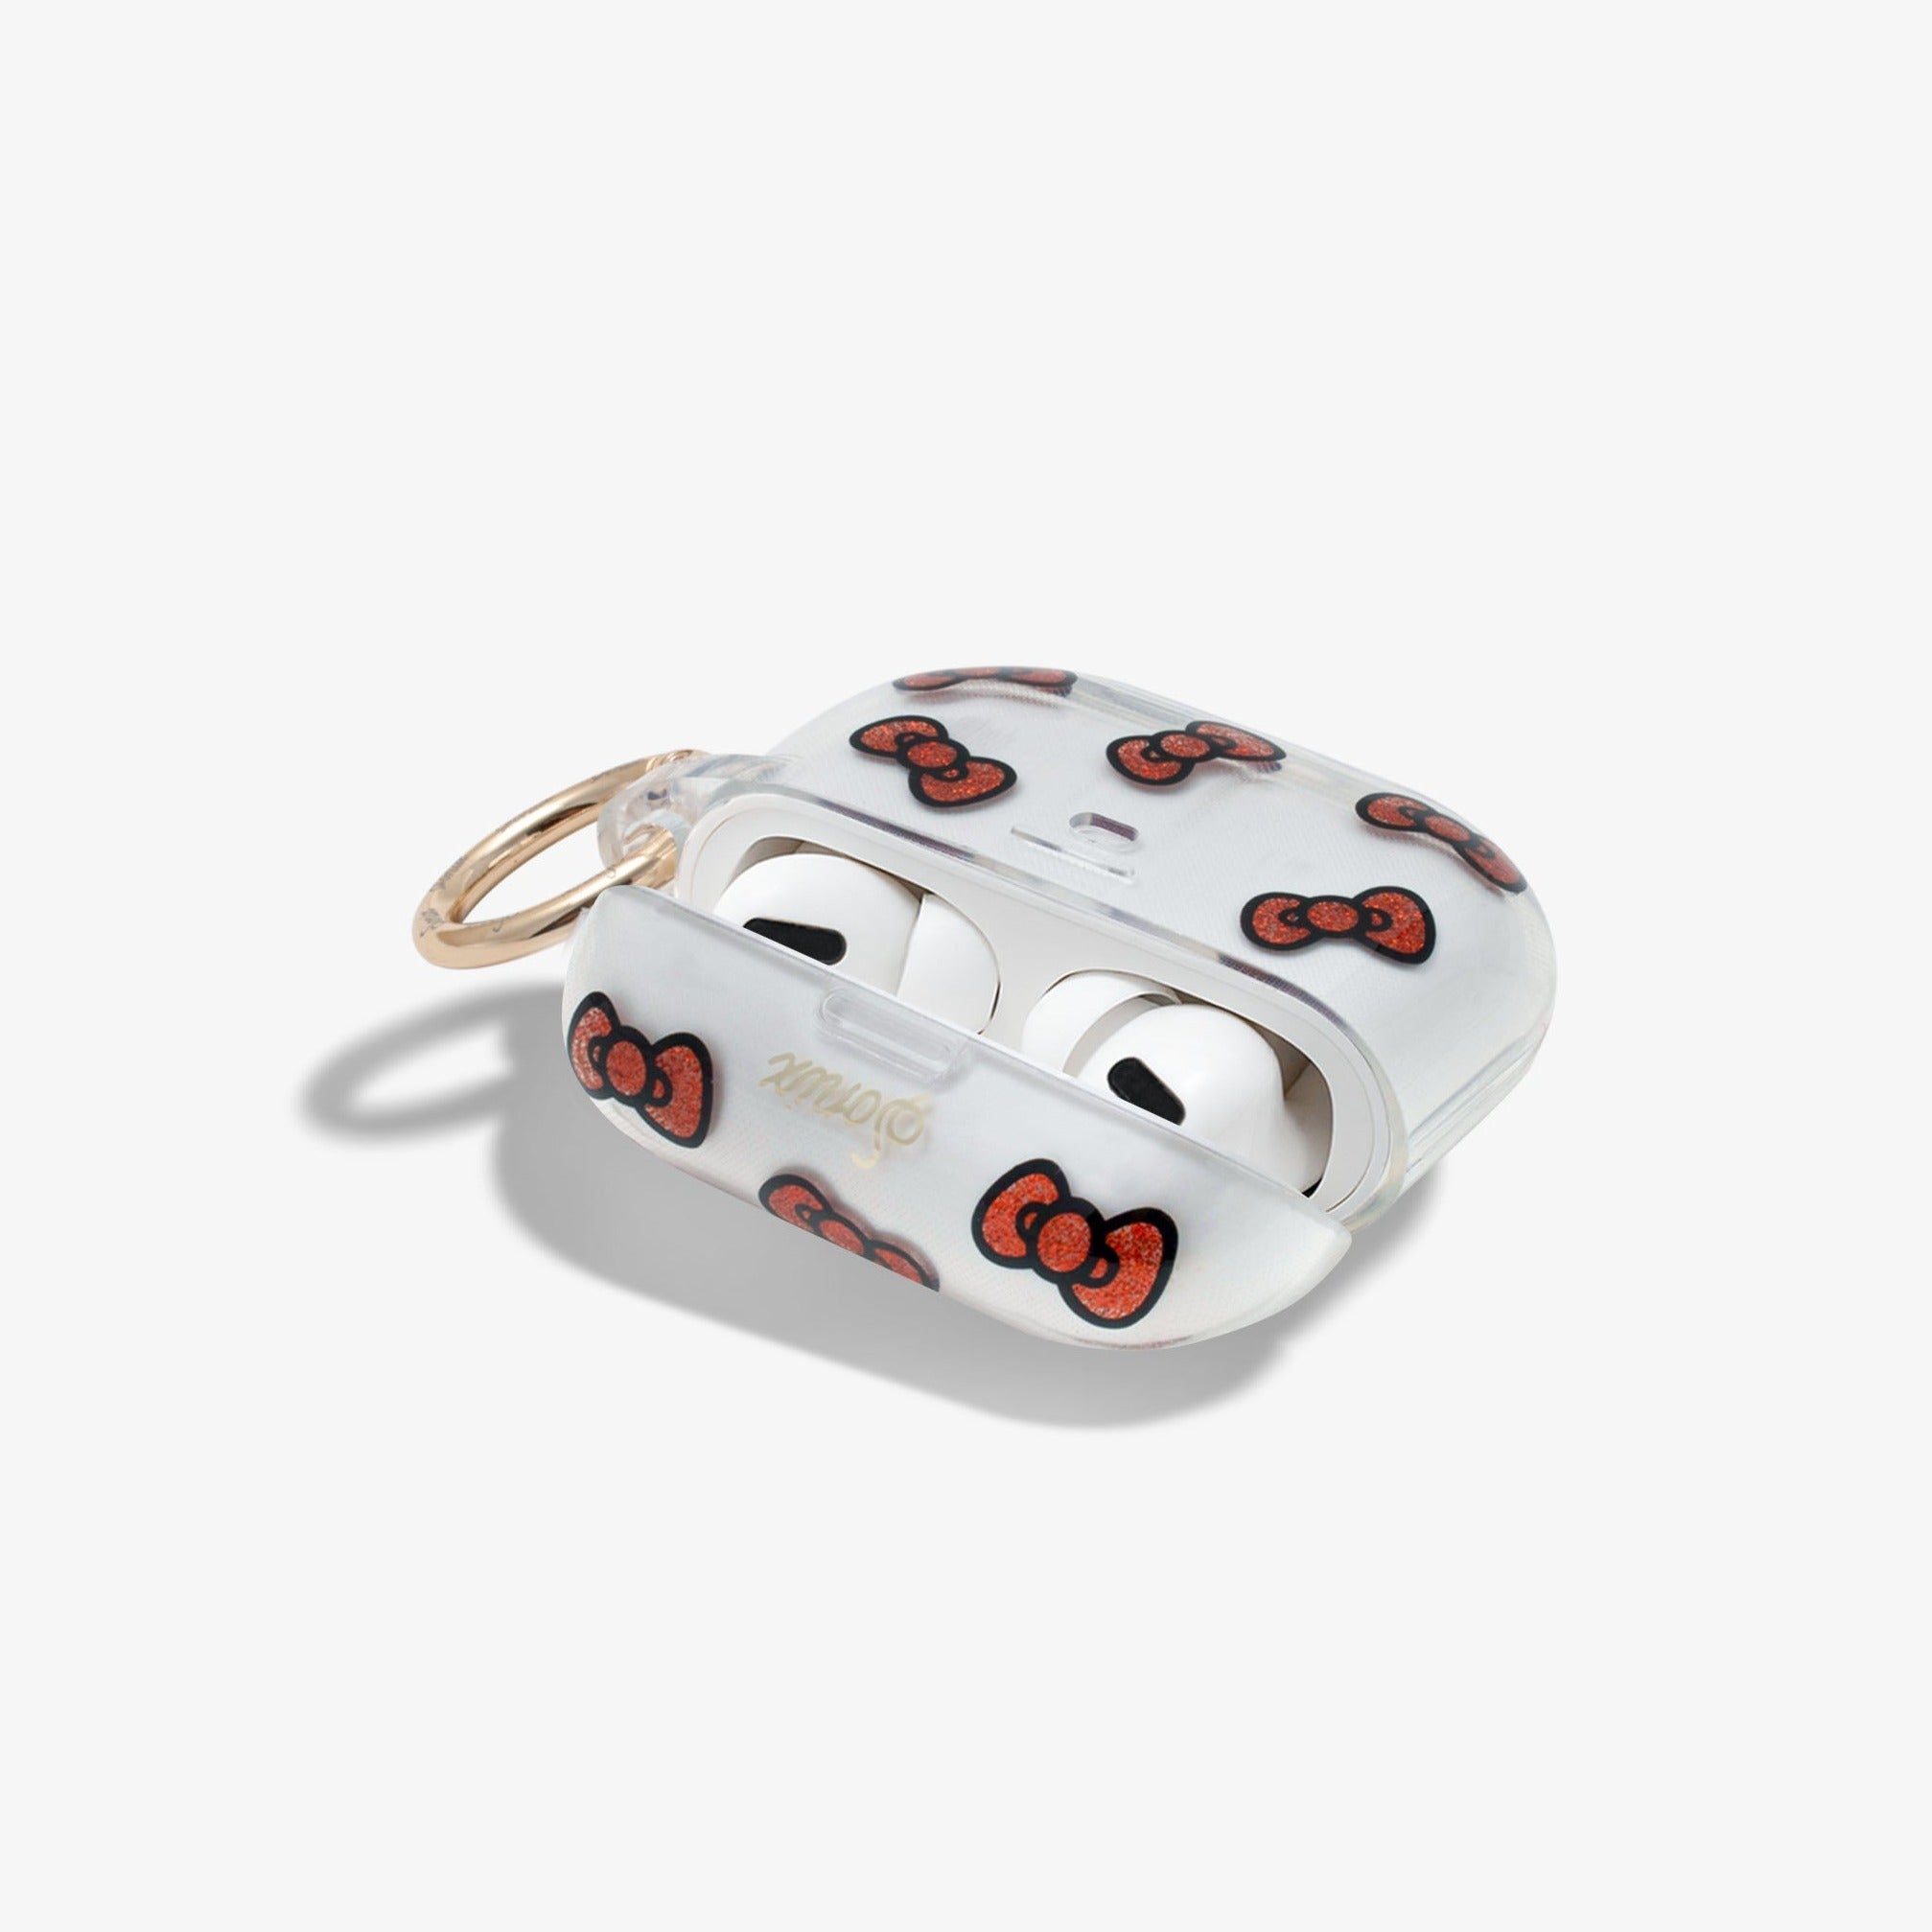 Classic Hello Kitty® AirPods Case